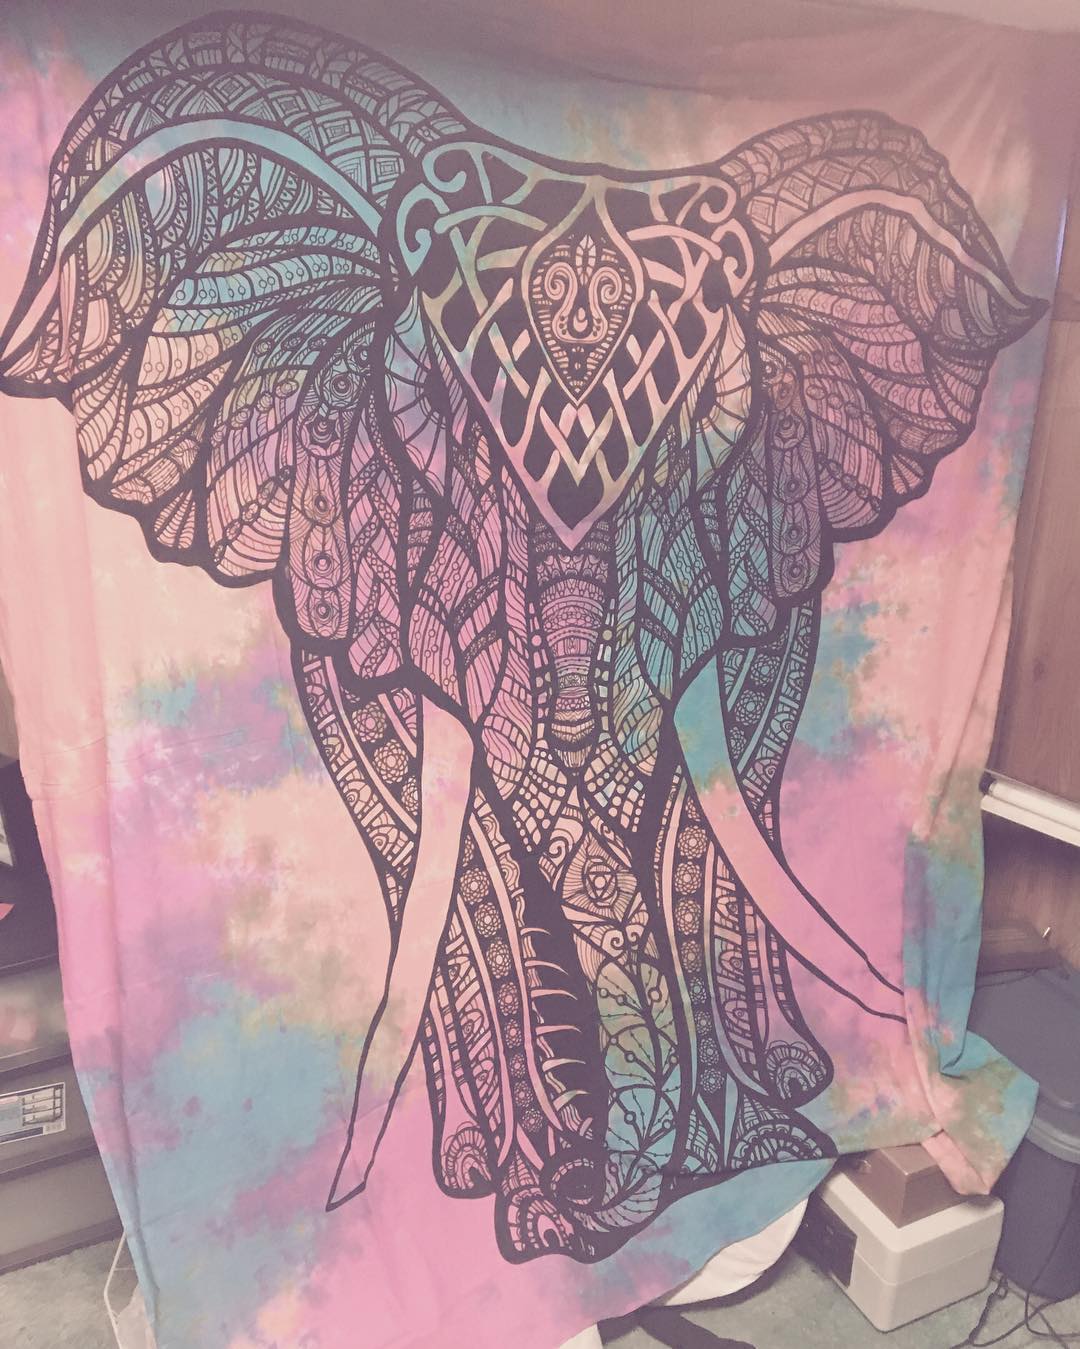 Absolutely love my elephant tapestry from @royalfurnish that i can finally post 💖🐘 Can't wait to set it up the way I want it. #royalfurnish